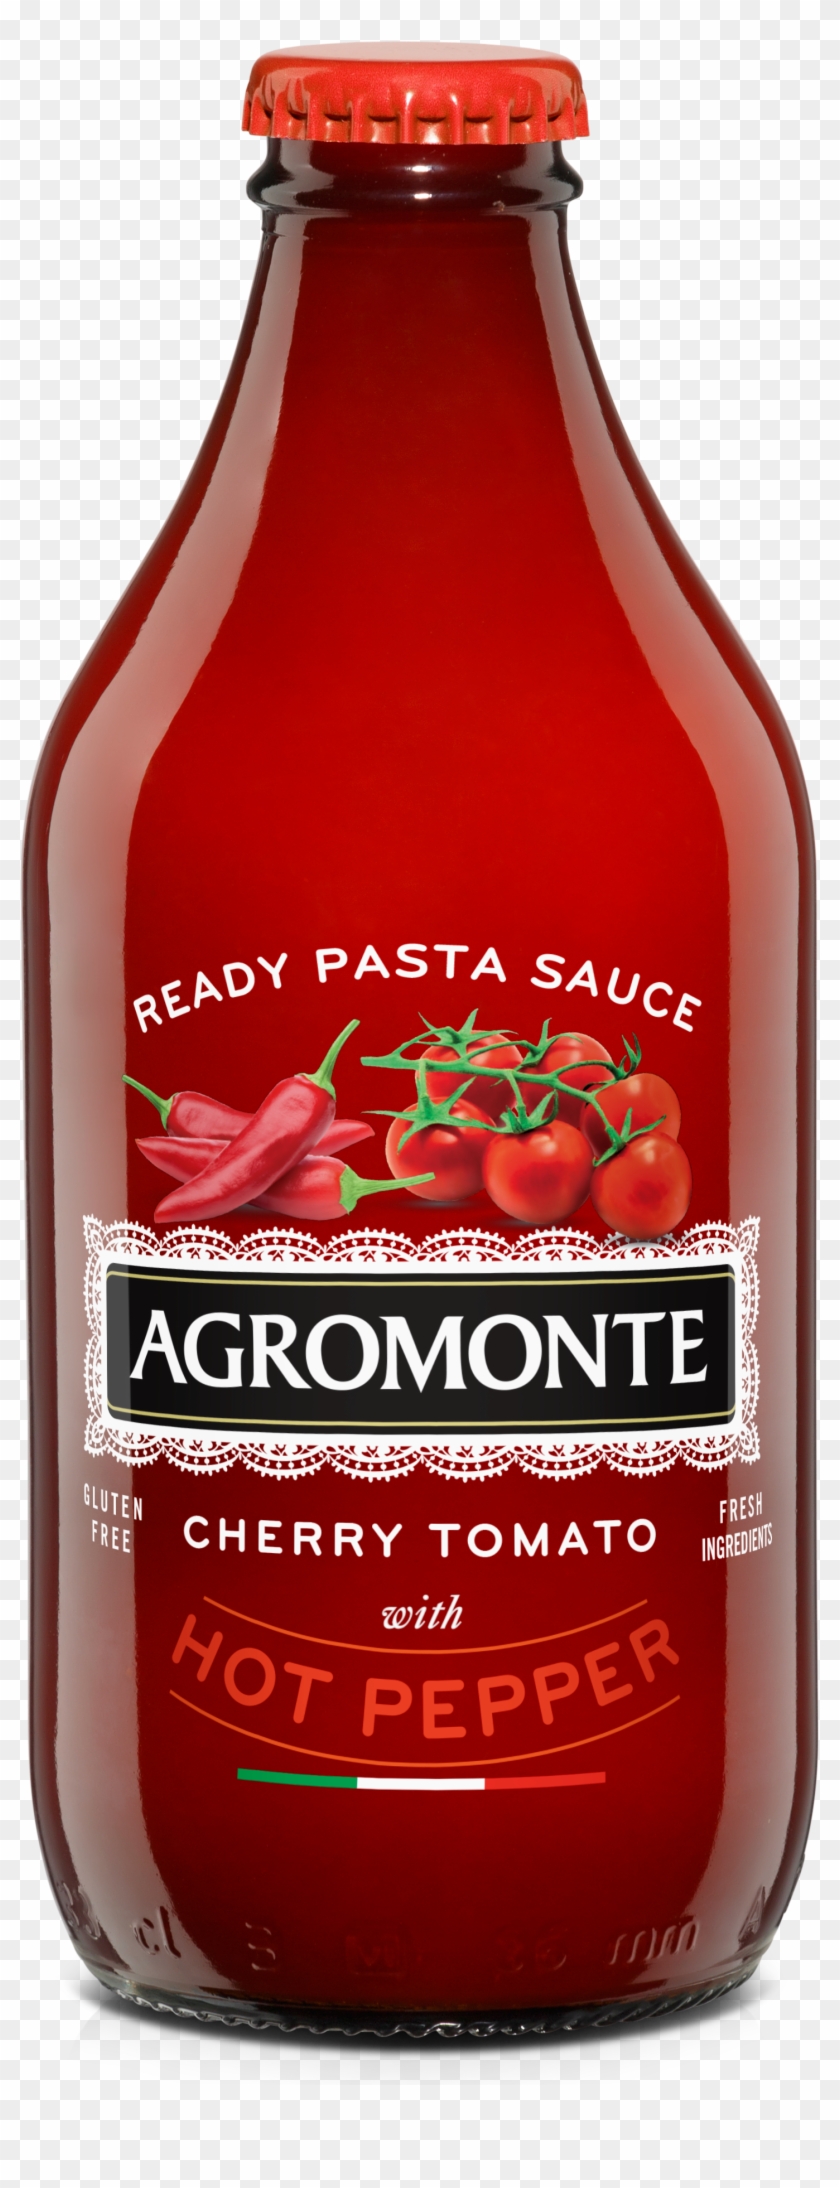 Ready To Use Cherry Tomato Pasta Sauce With Hot Pepper - Agromonte Kirschtomaten Clipart #2563532